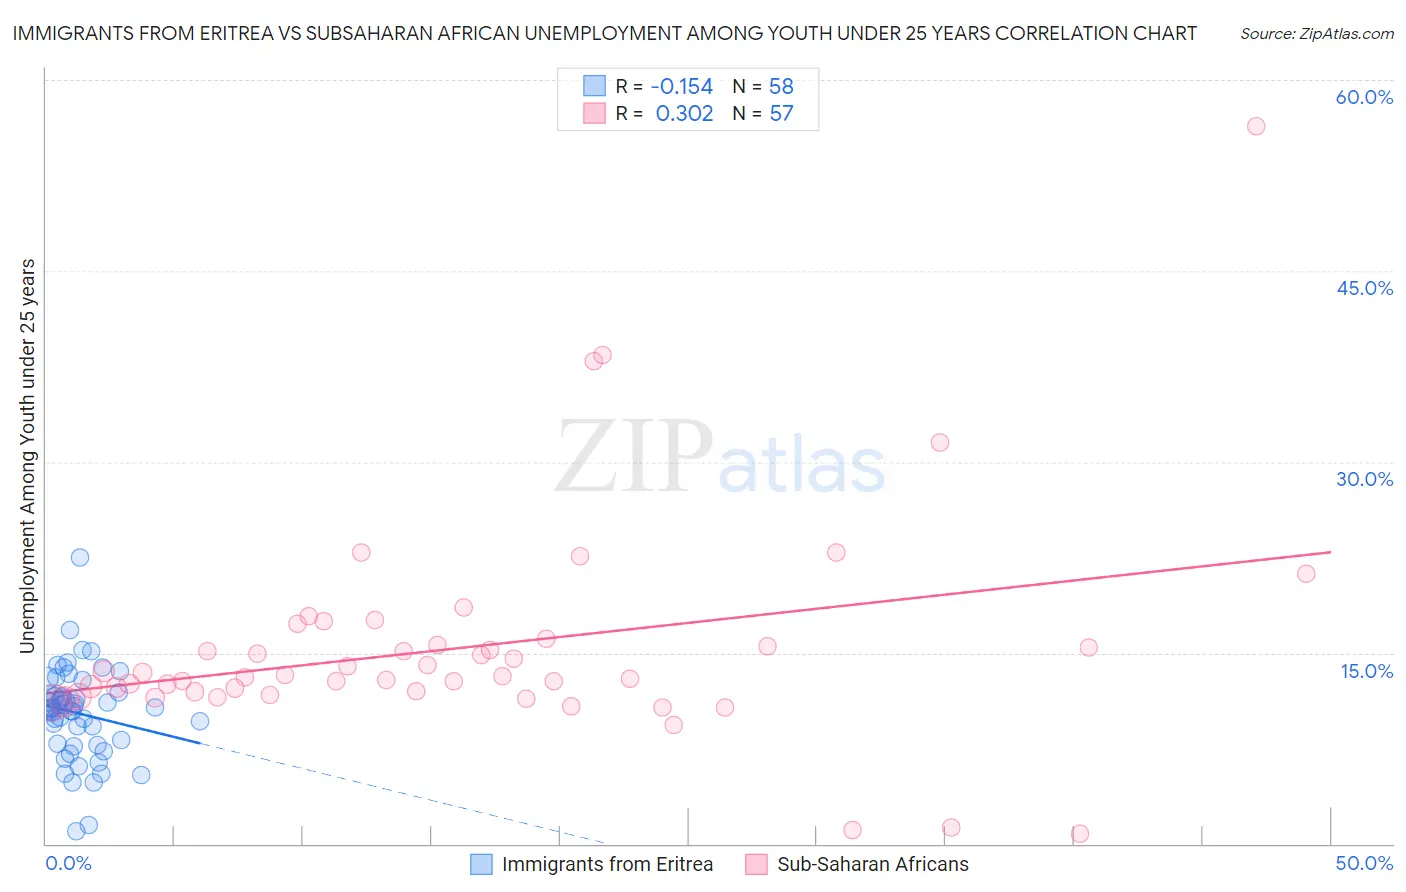 Immigrants from Eritrea vs Subsaharan African Unemployment Among Youth under 25 years